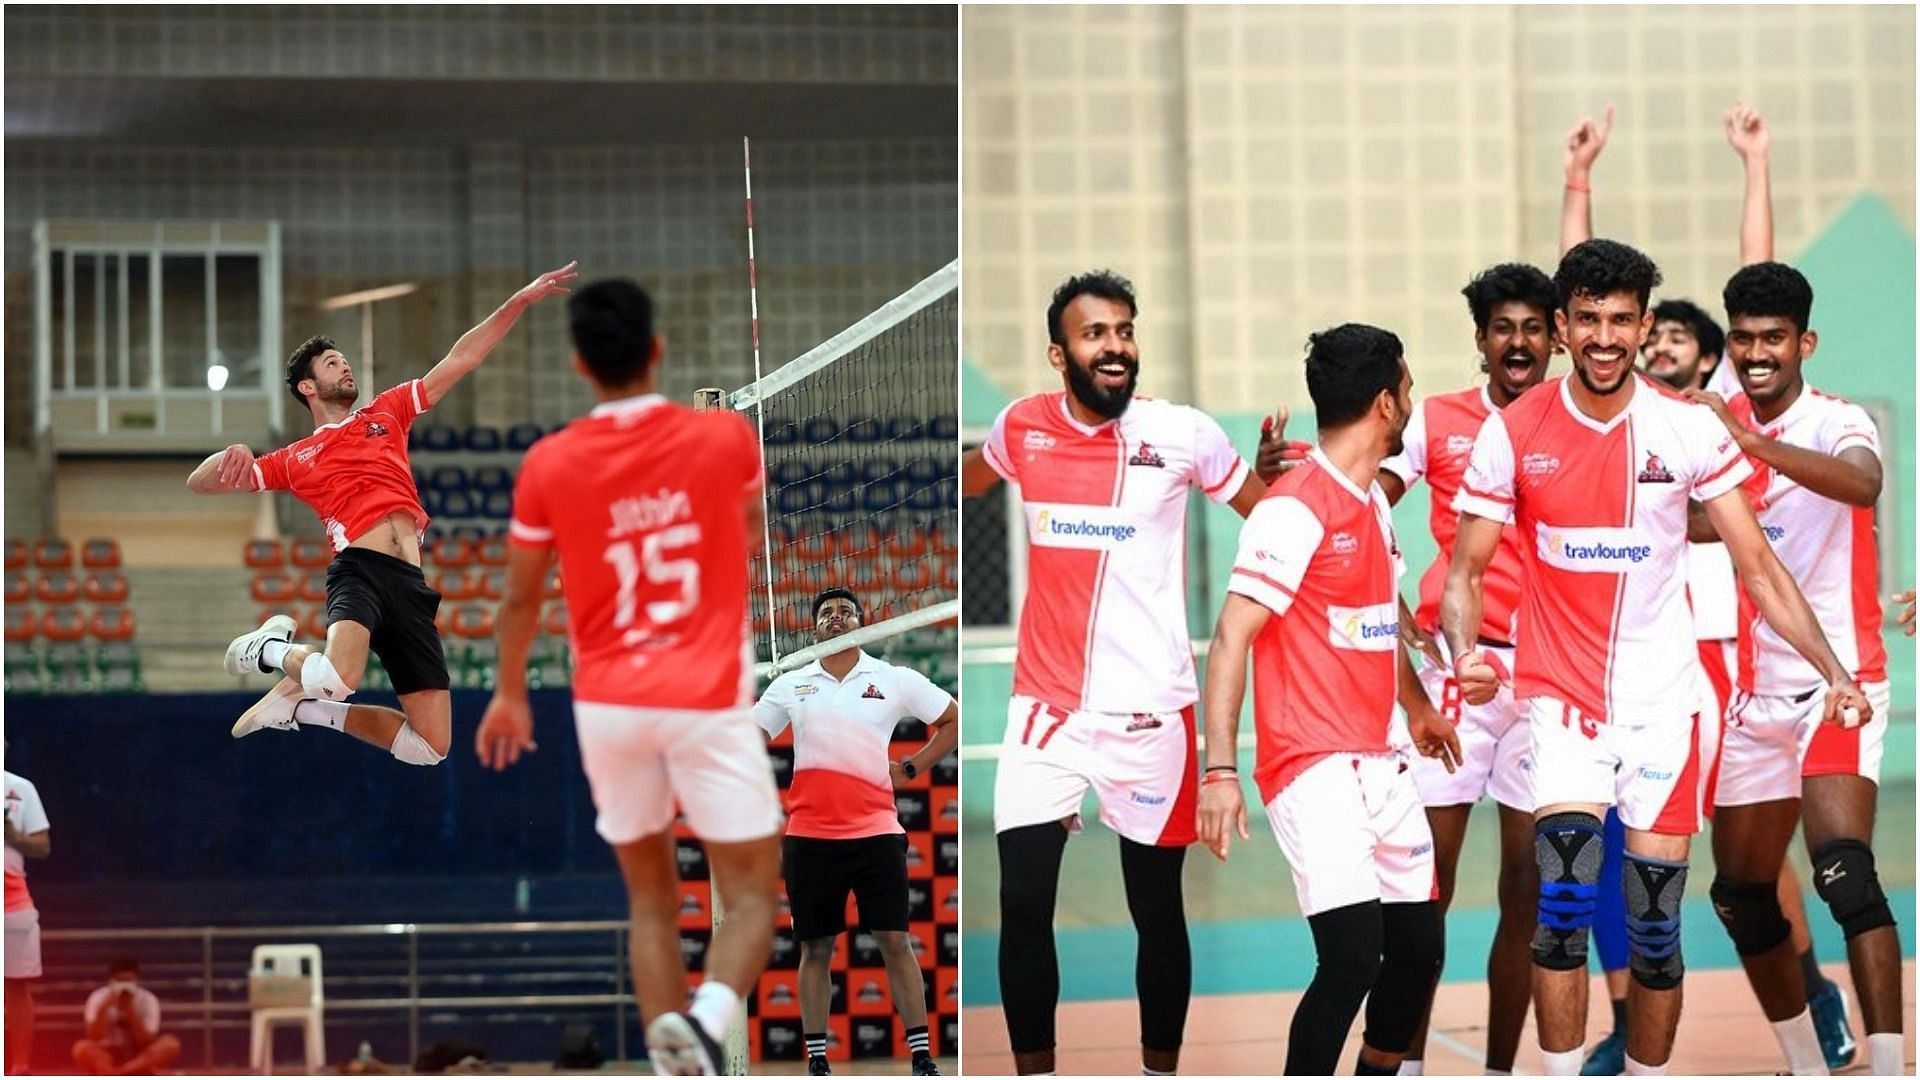 PVL 2022: Calicut Heroes in action during practice session (Pic Credit: PVL)